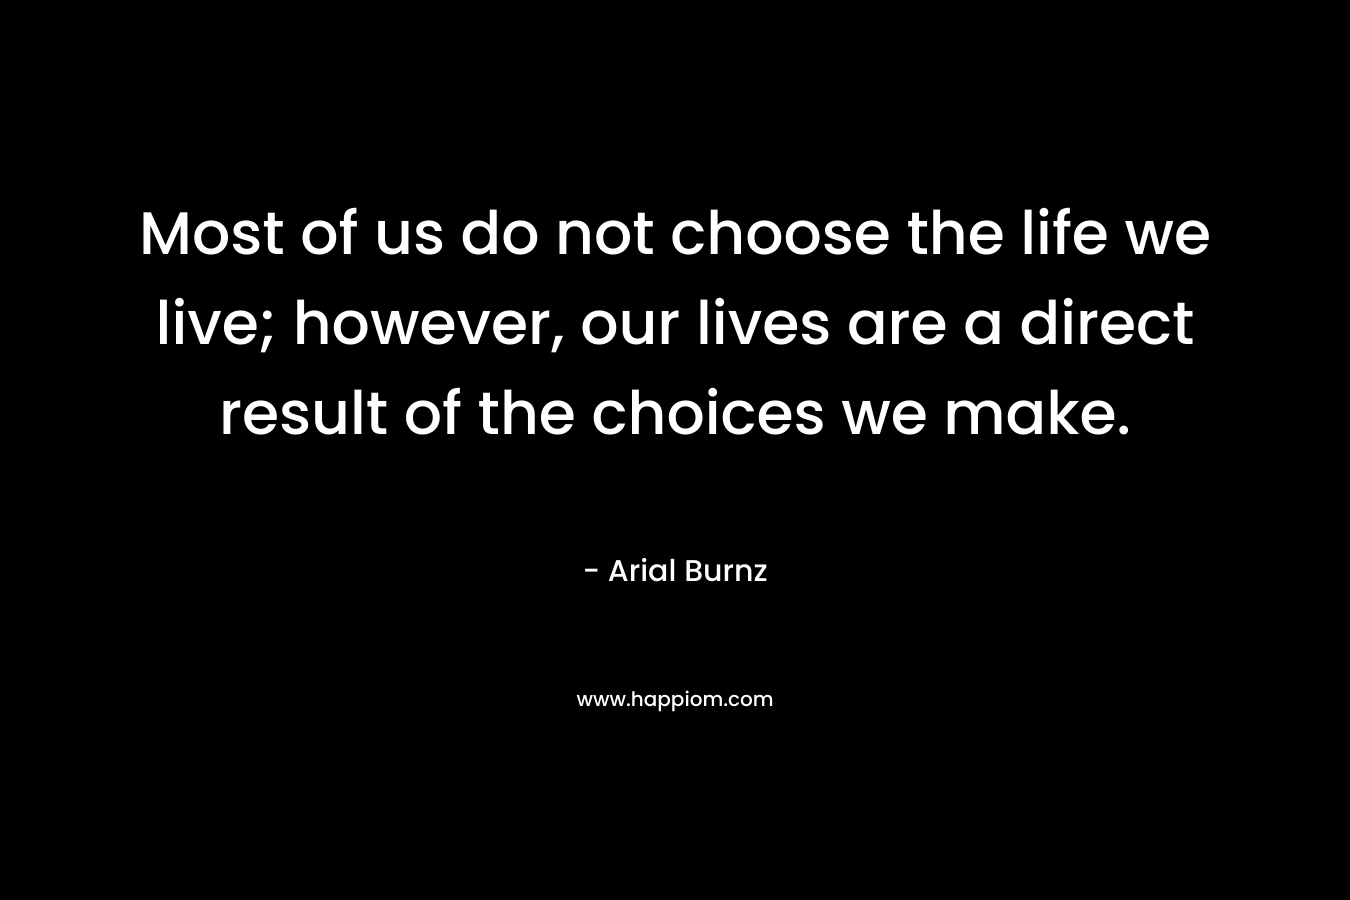 Most of us do not choose the life we live; however, our lives are a direct result of the choices we make.